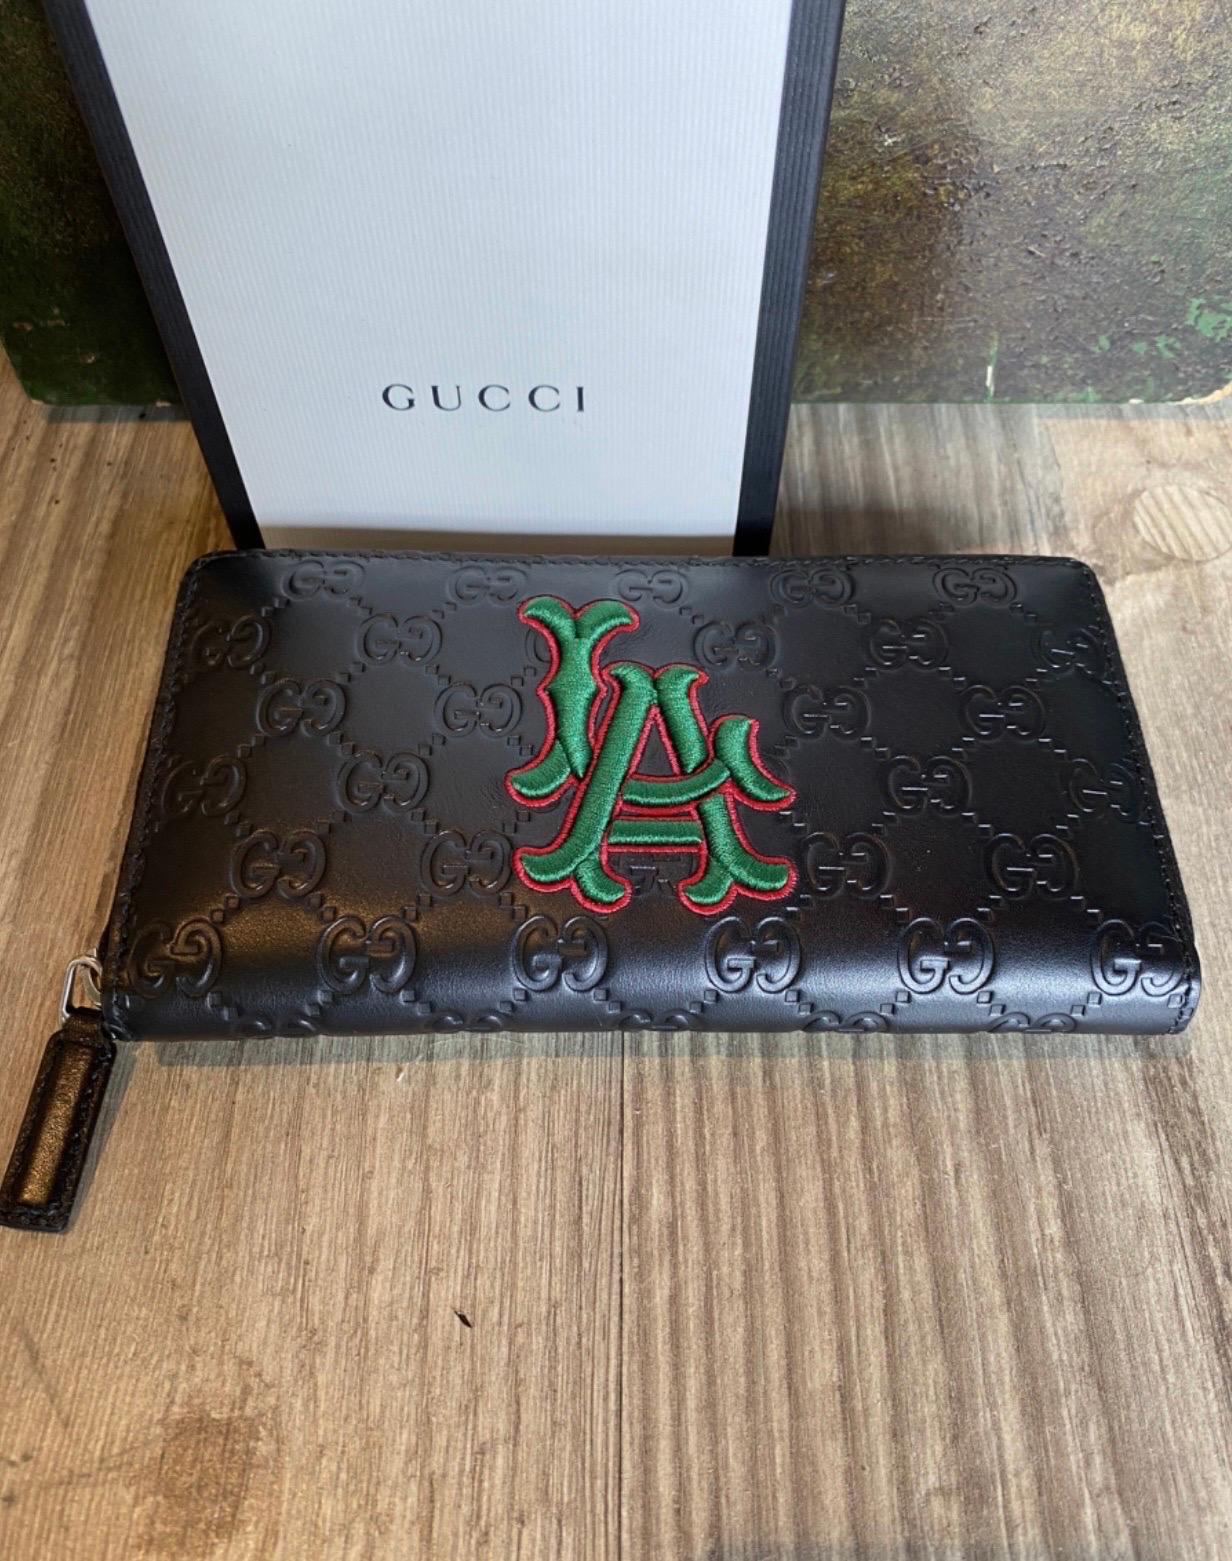 Gucci LA dodgers patch black wallet in black logoed leather with LA emblem applied on the front, new never used with box, dimensions: length 19cm width 11cm height 2.5cm